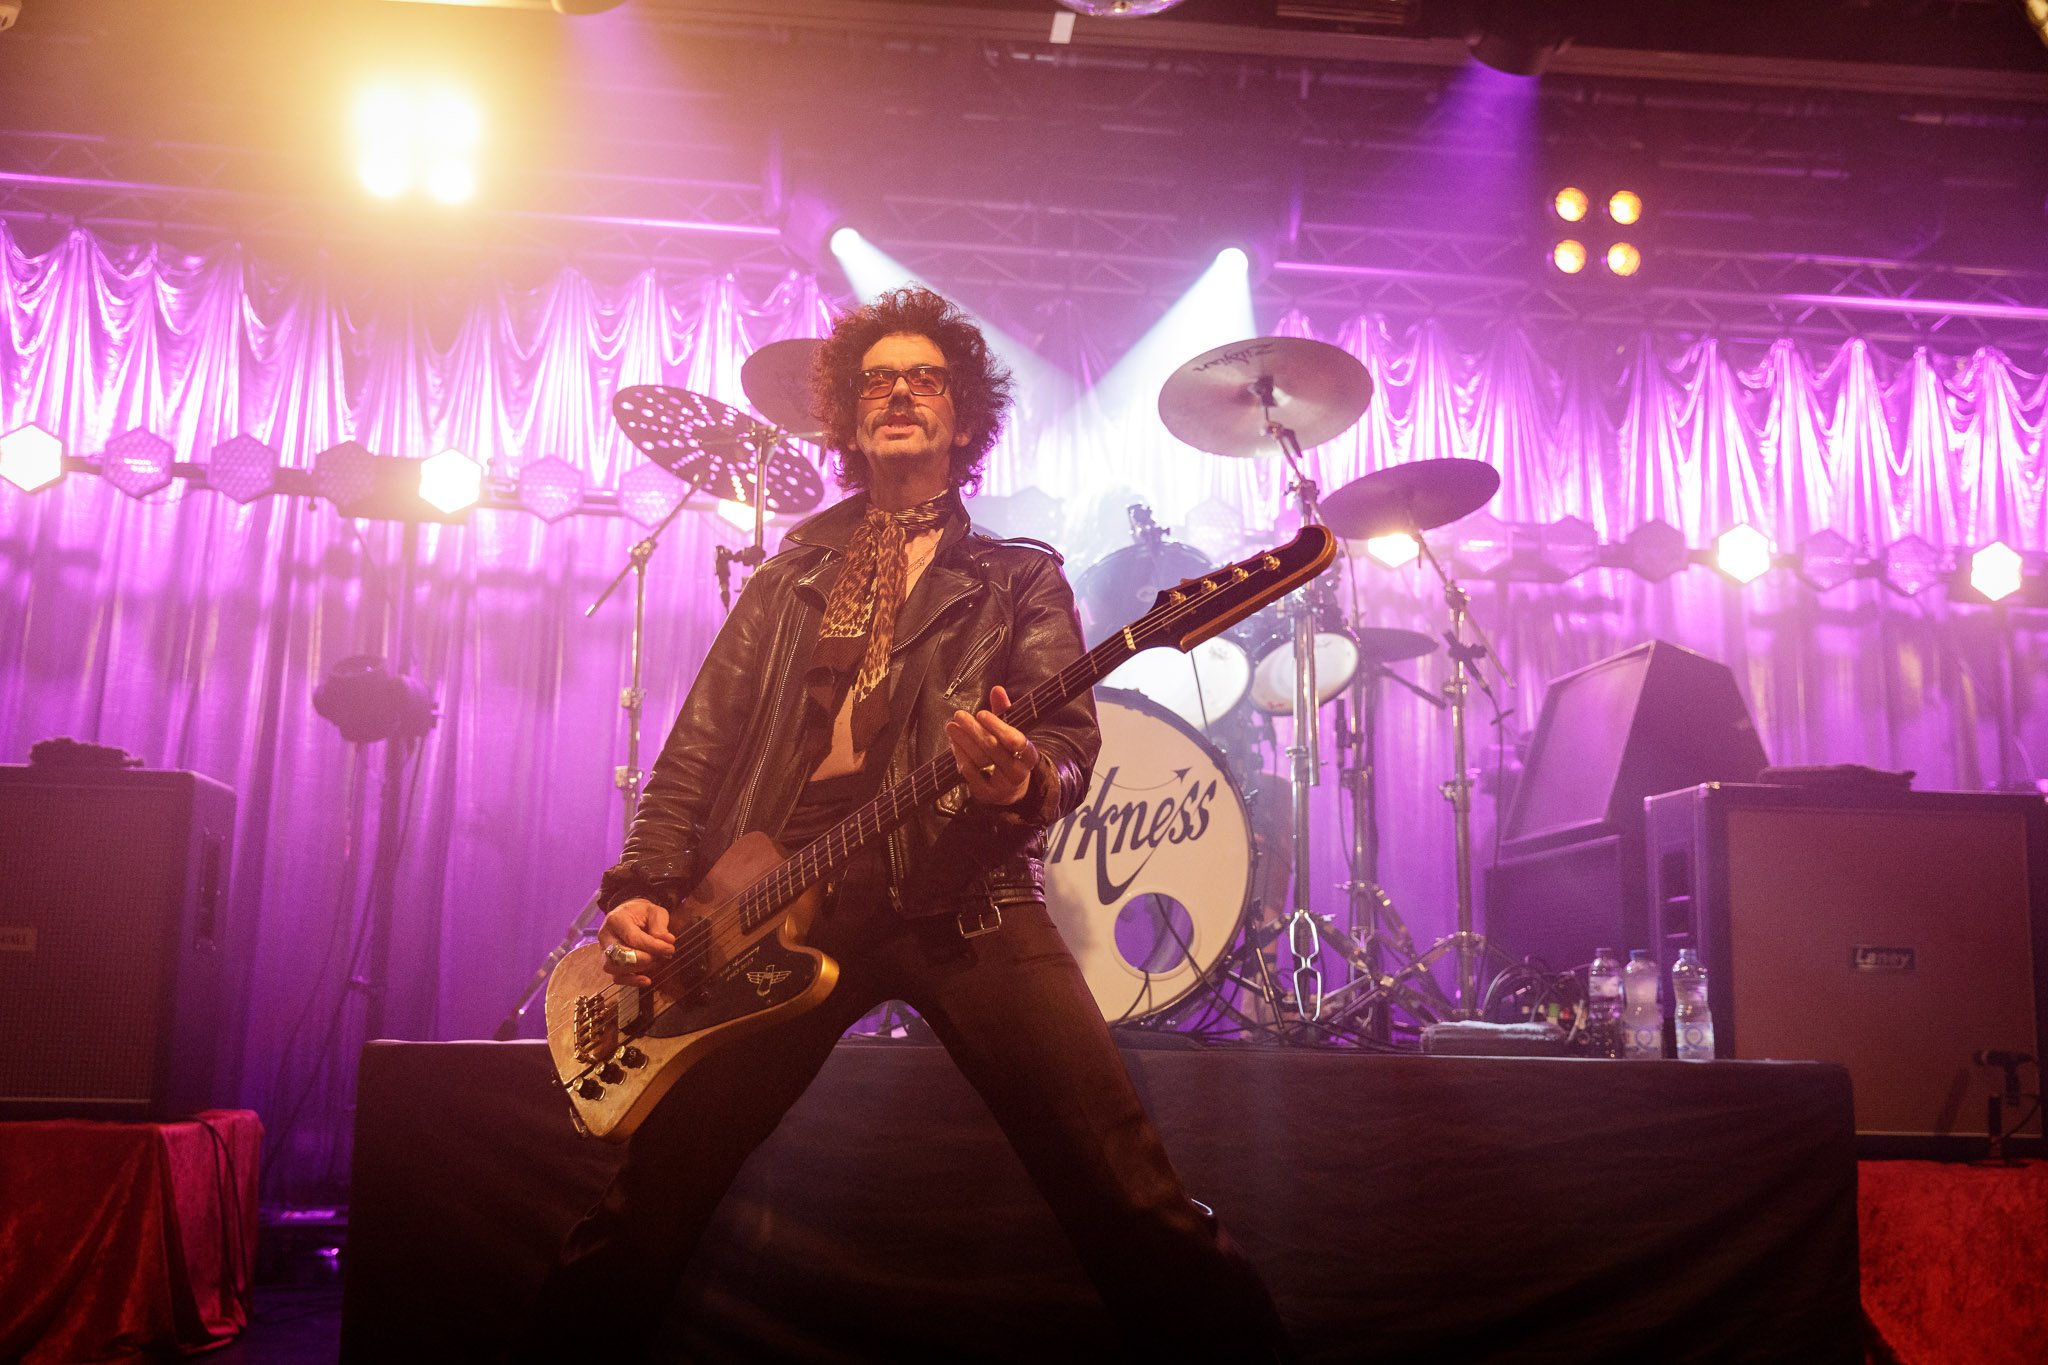 The Darkness at the O2 Academy in Liverpool on December 2nd 2021